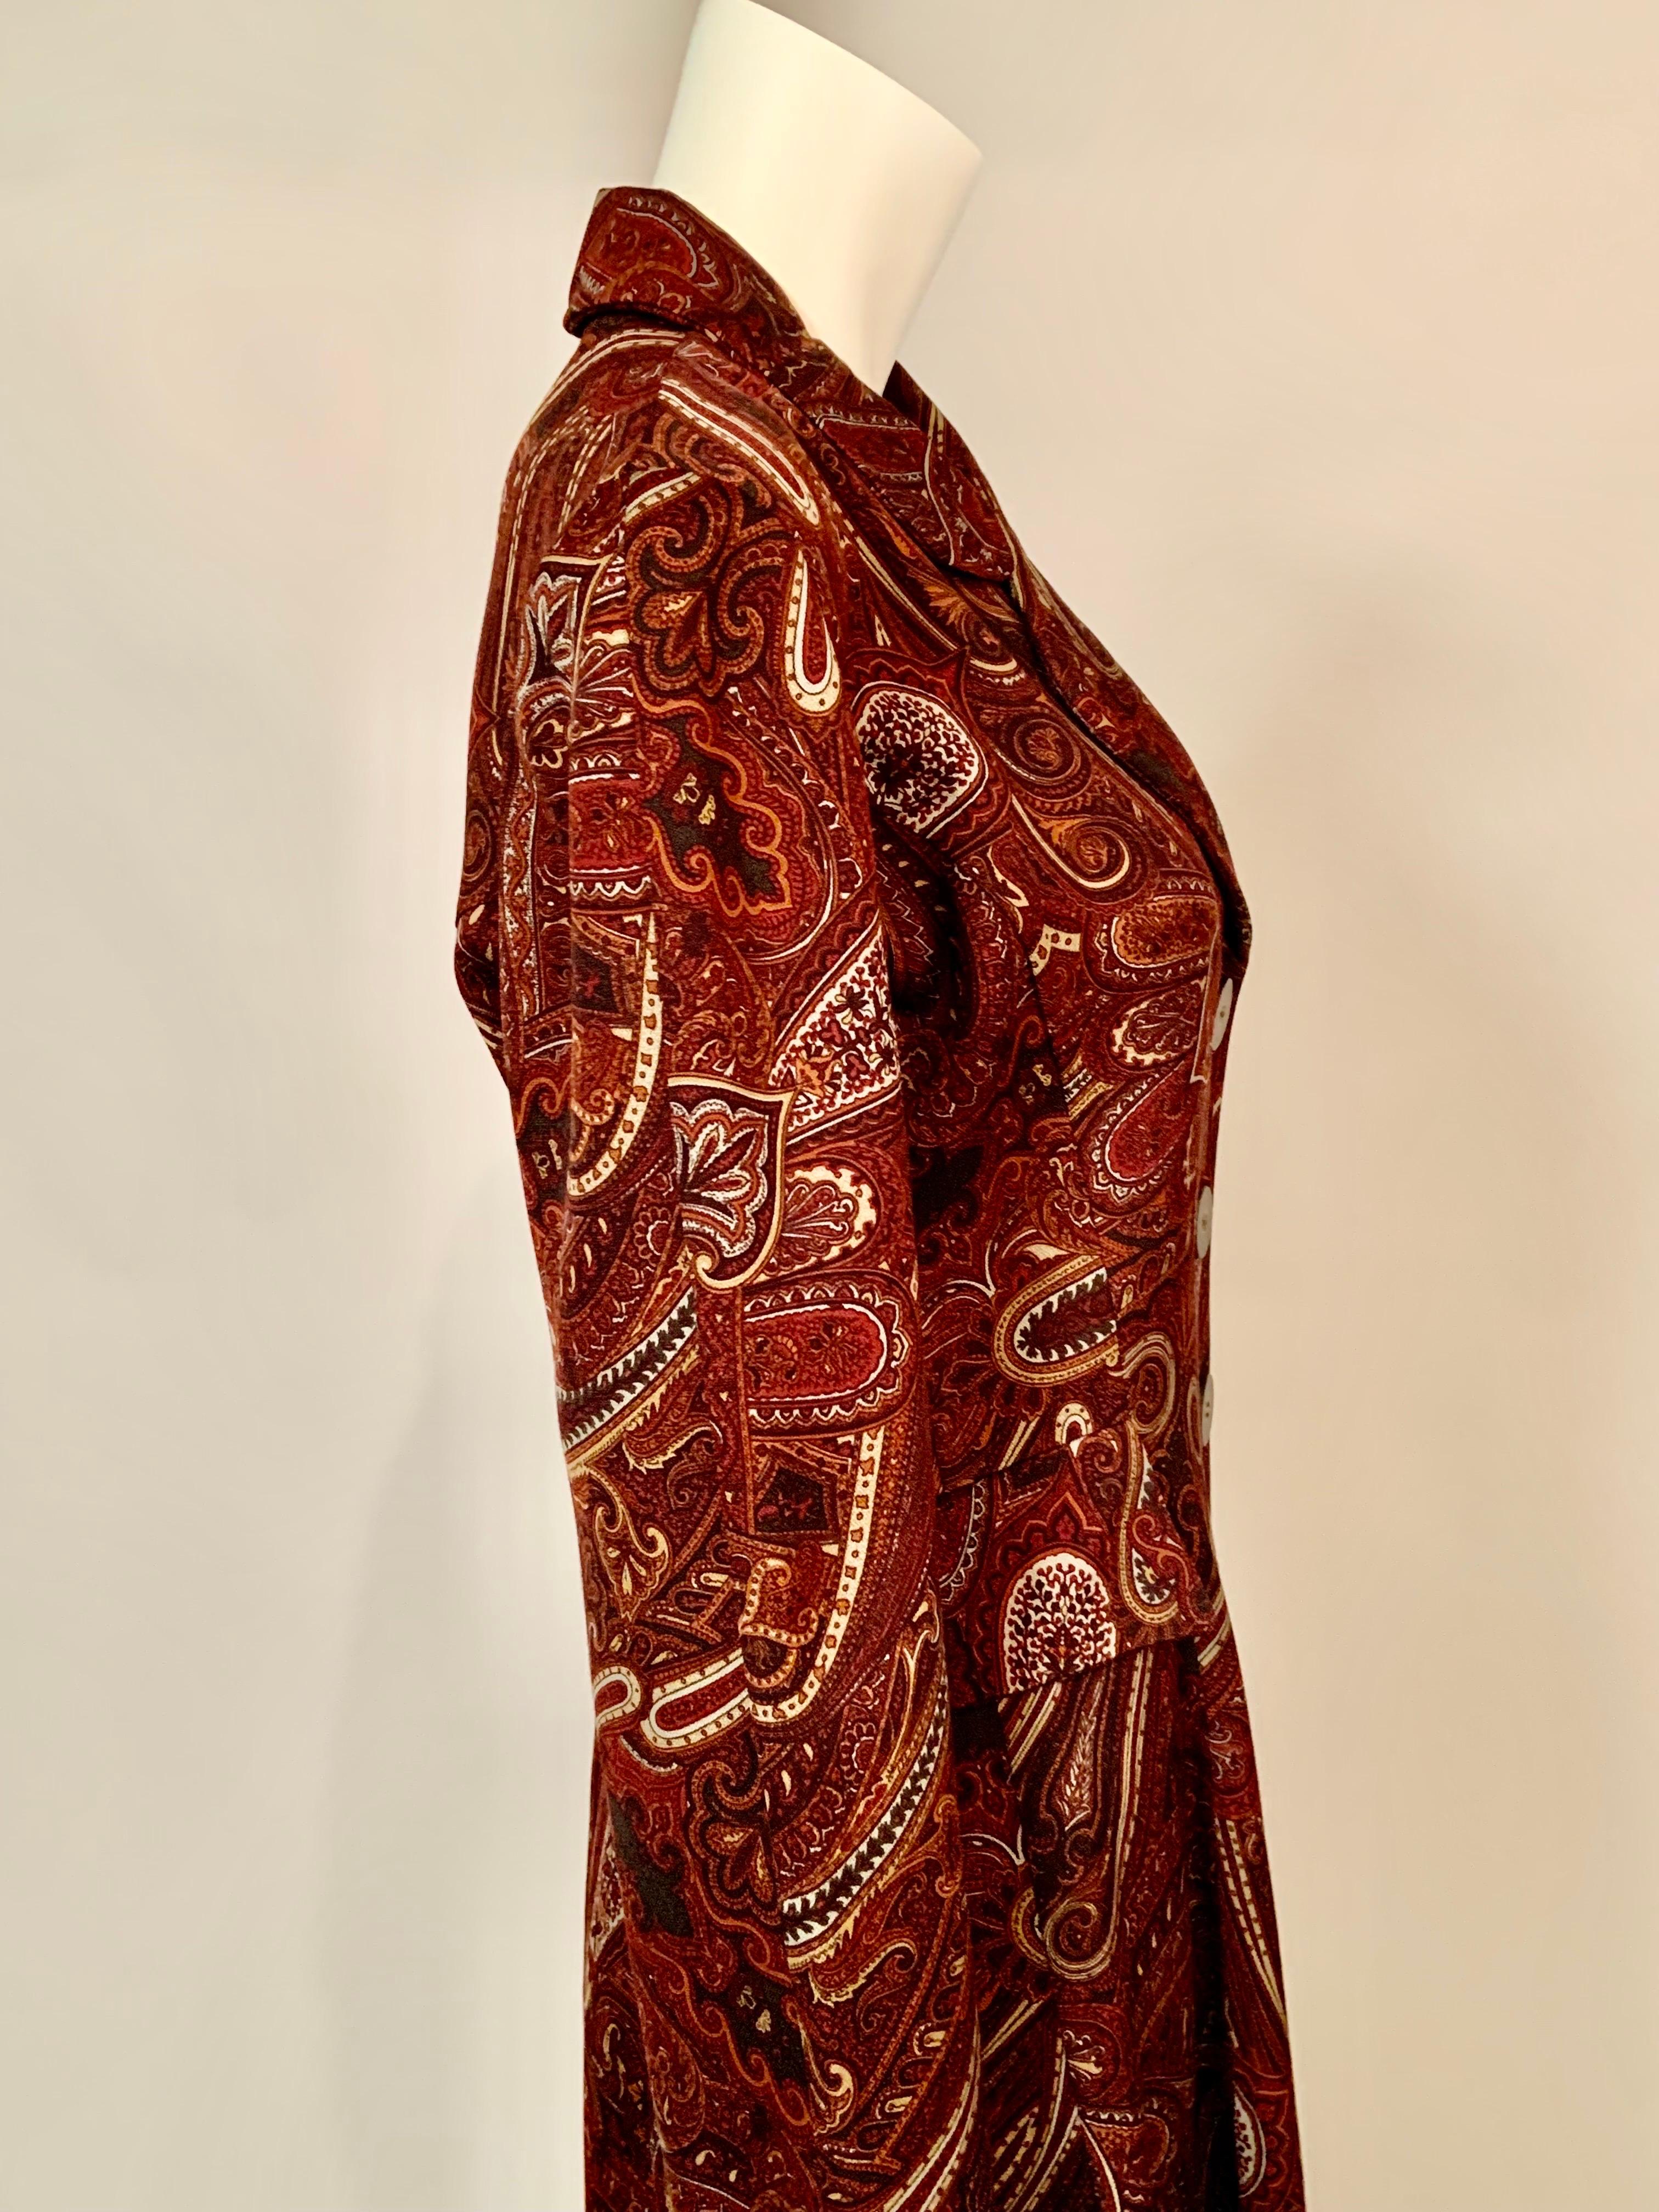 Bill Blass Paisley Patterned Coat in a Larger Size For Sale 2